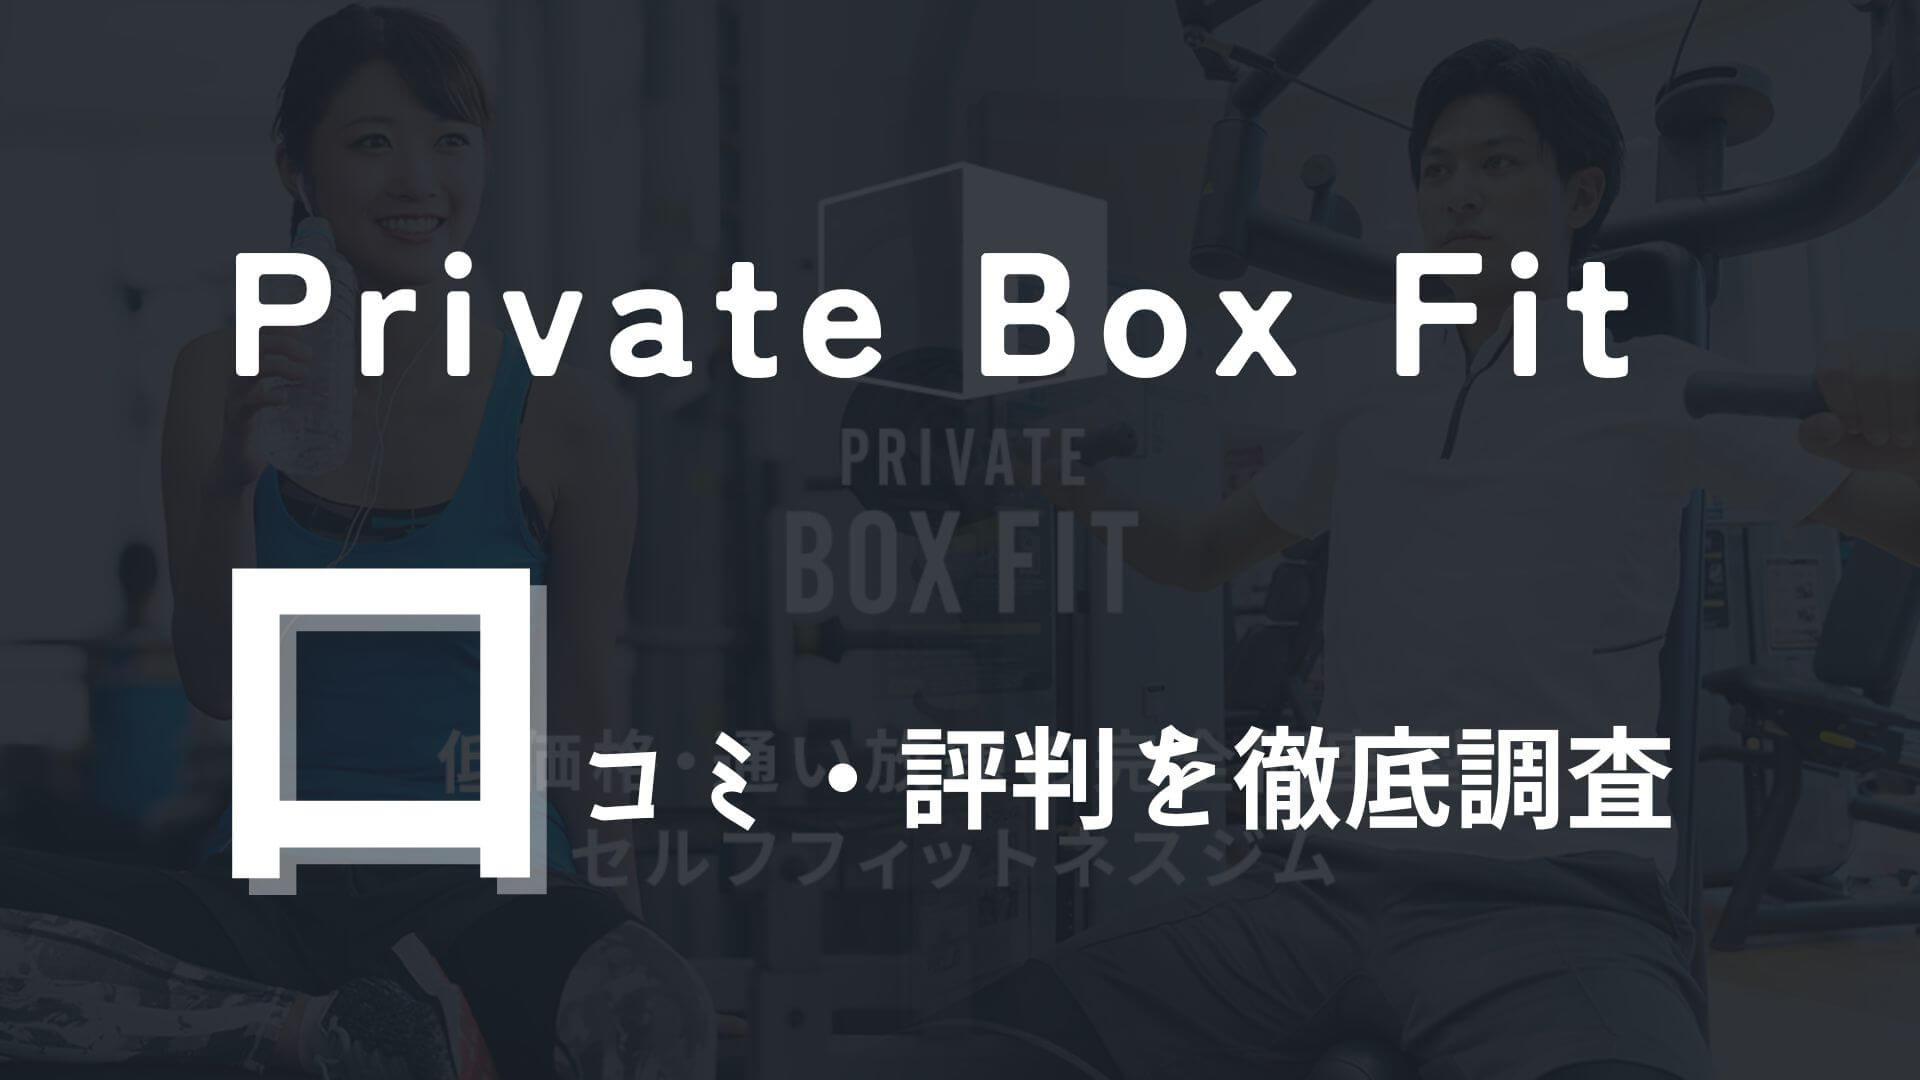 Private Box Fitの口コミや評判を徹底調査！